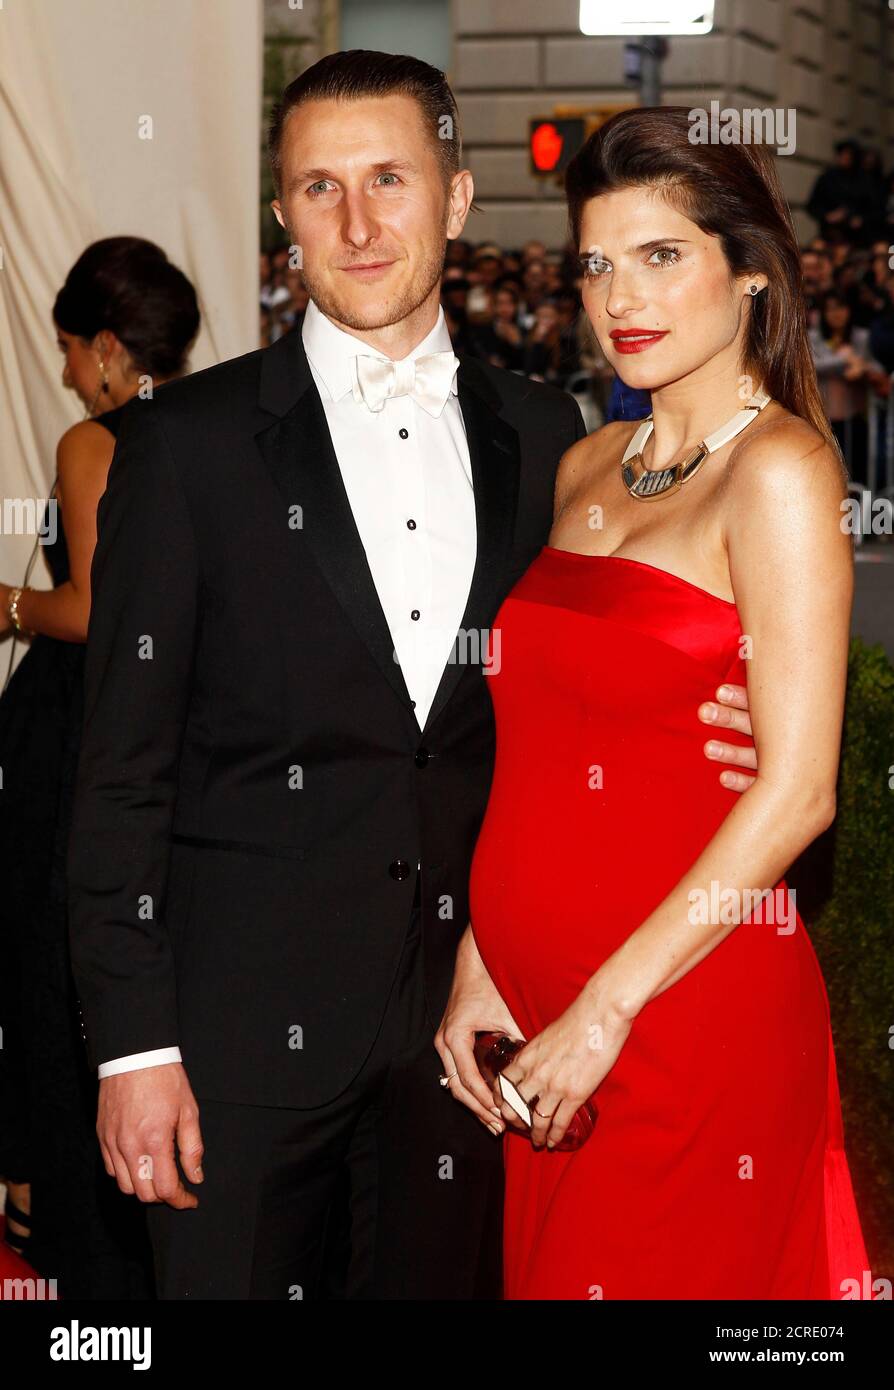 Scott Campbell and Lake Bell arrive at the Metropolitan Museum of Art Costume Institute Gala Benefit celebrating the opening of 'Charles James: Beyond Fashion' in Upper Manhattan, New York May 5, 2014.  REUTERS/Carlo Allegri (UNITED STATES  - Tags: ENTERTAINMENT FASHION) Stock Photo